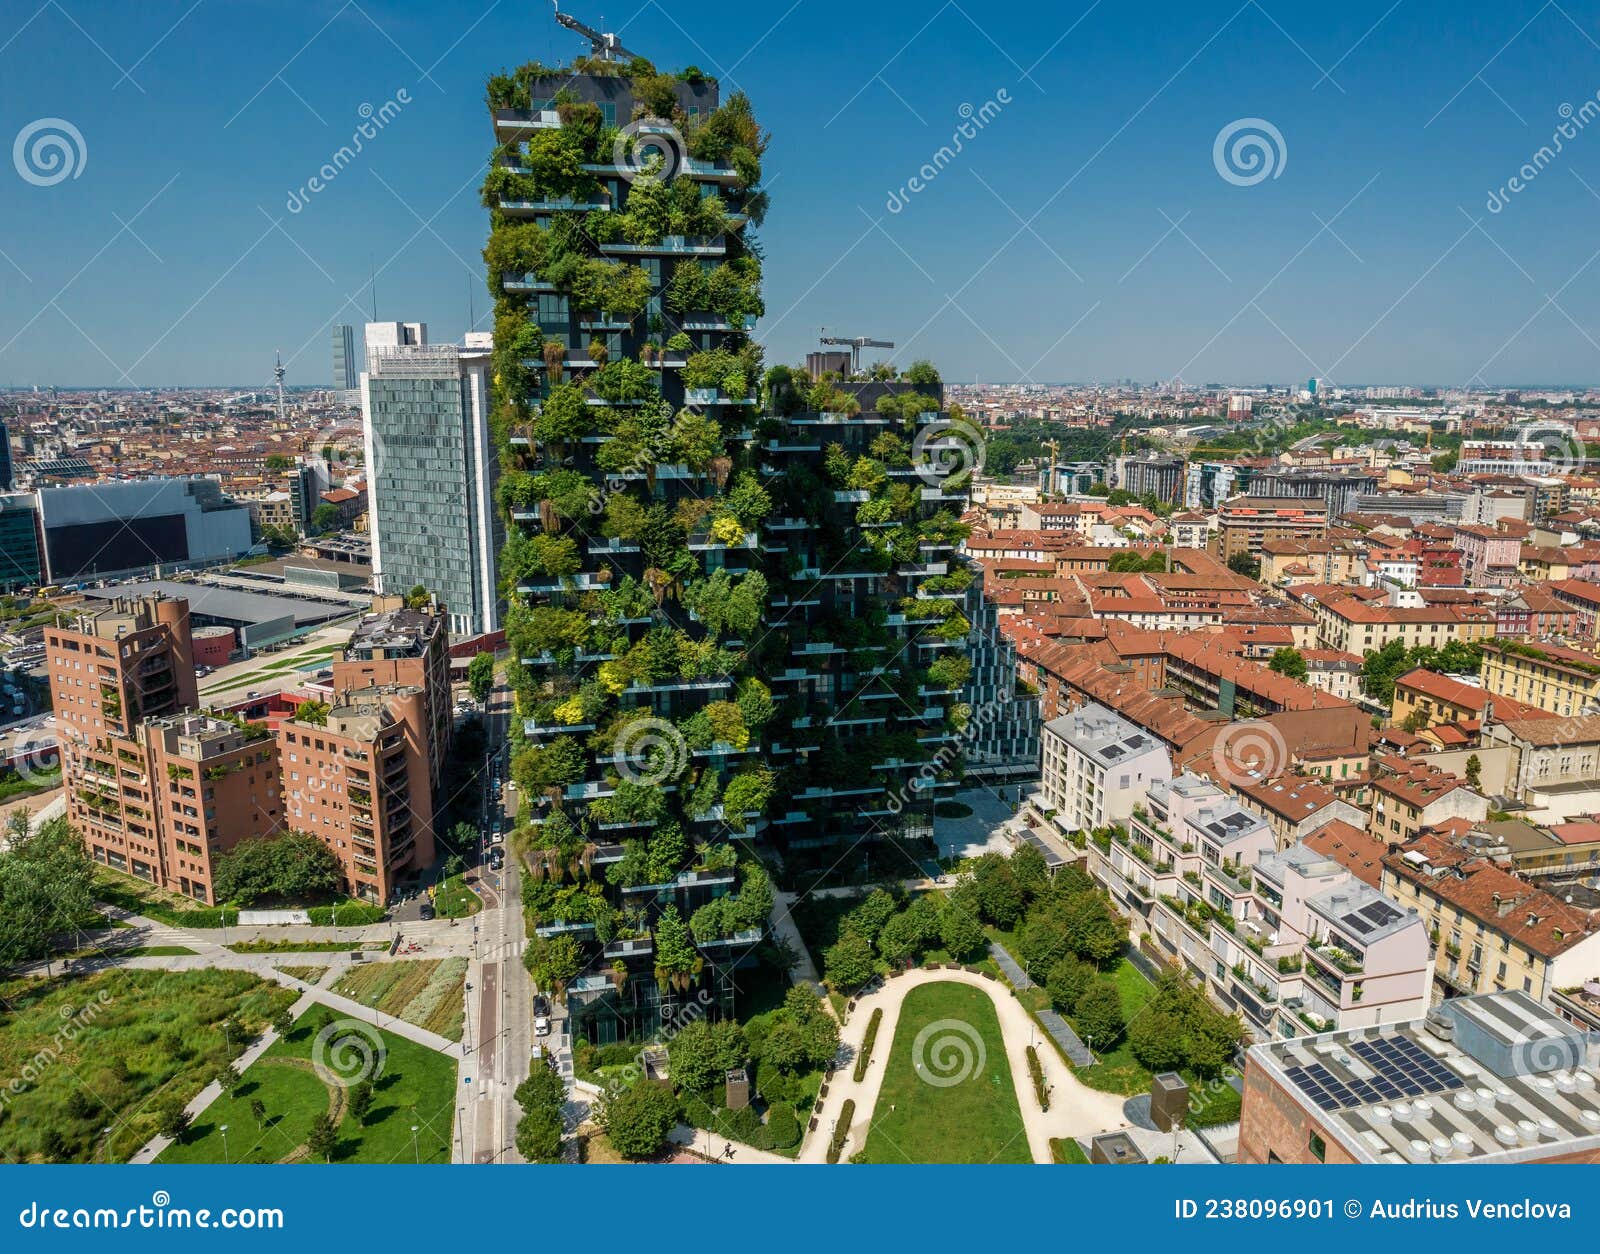 aerial photo of bosco verticale, vertical forest in milan, porta nuova district